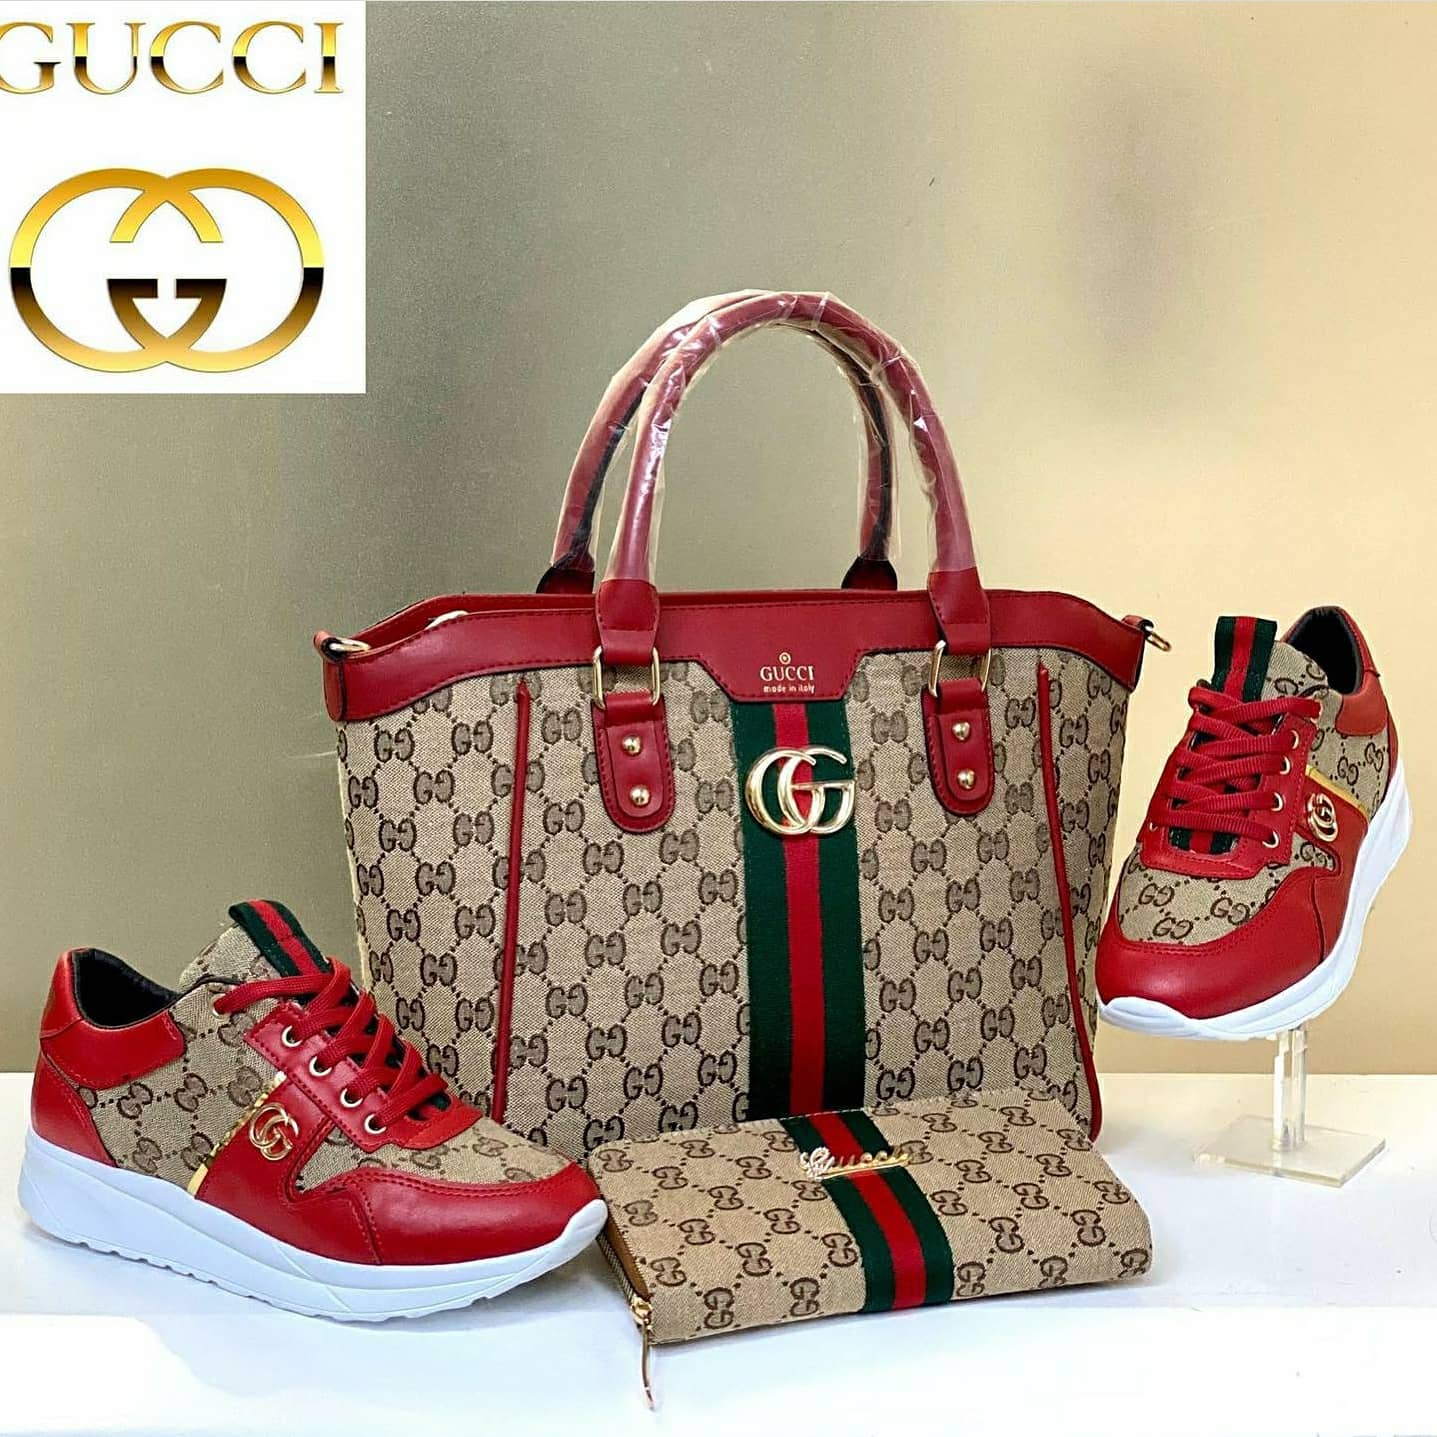 Gucci luxurious sneakers